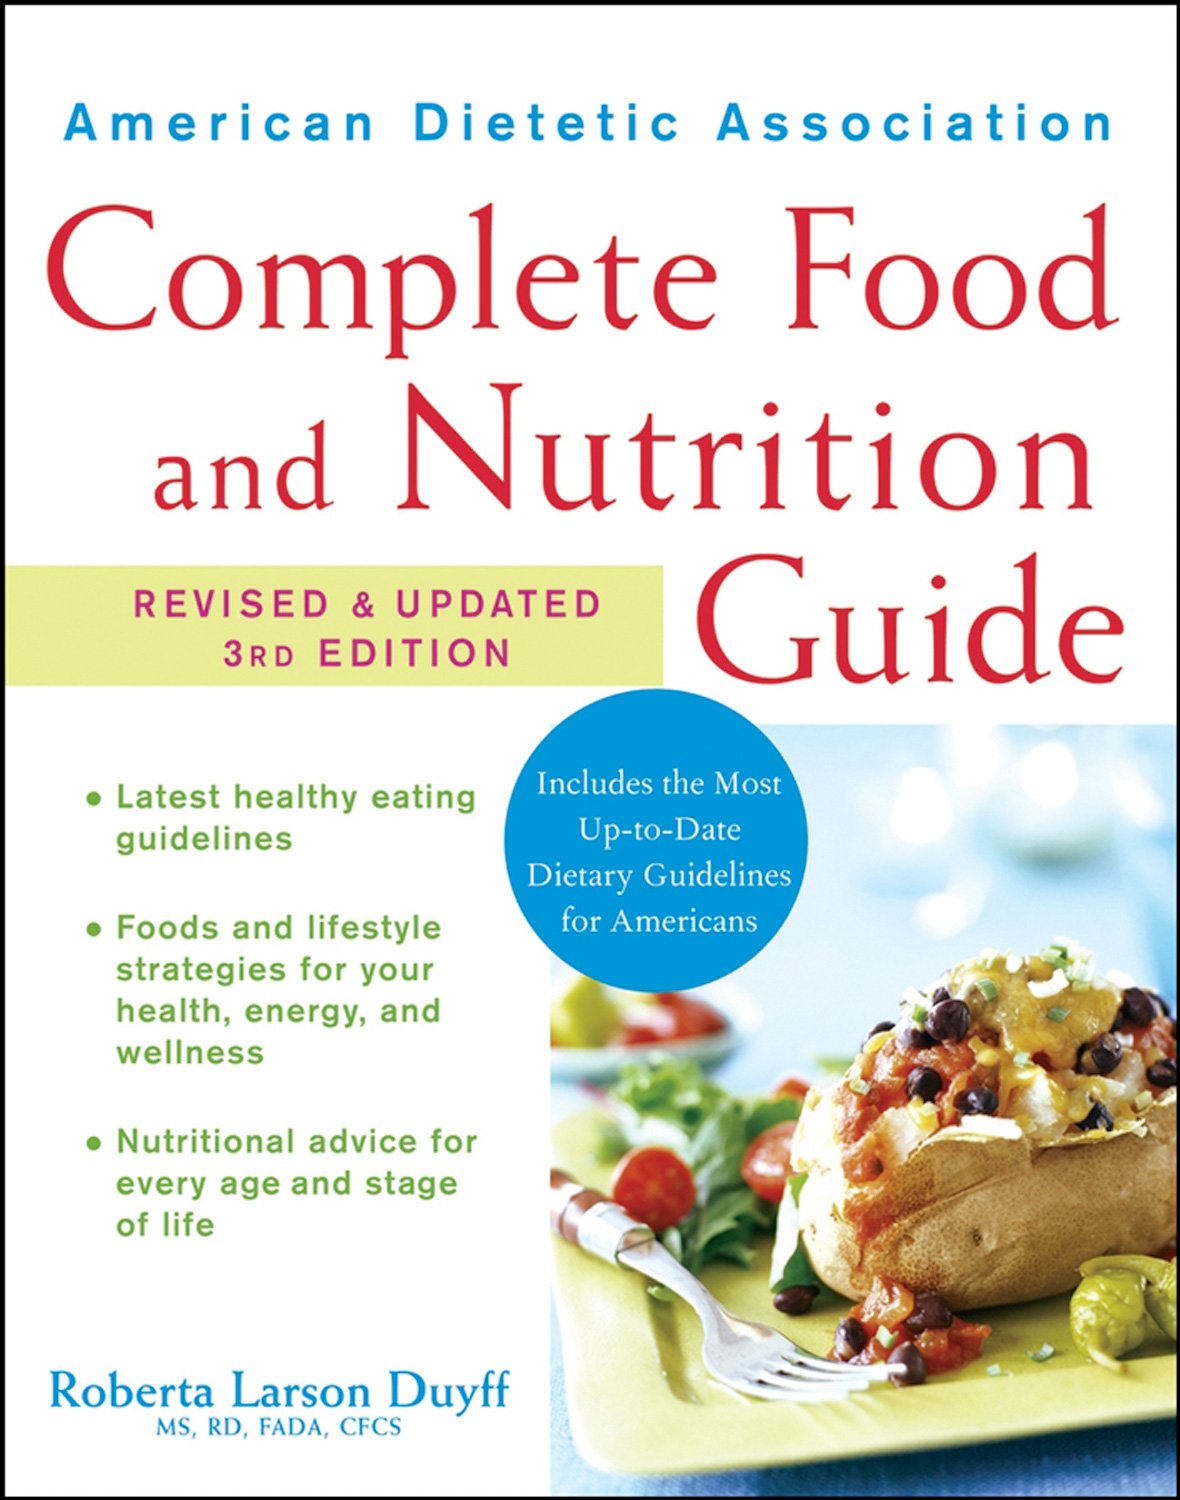 American Dietetic Association Complete Food and Nutrition Guide